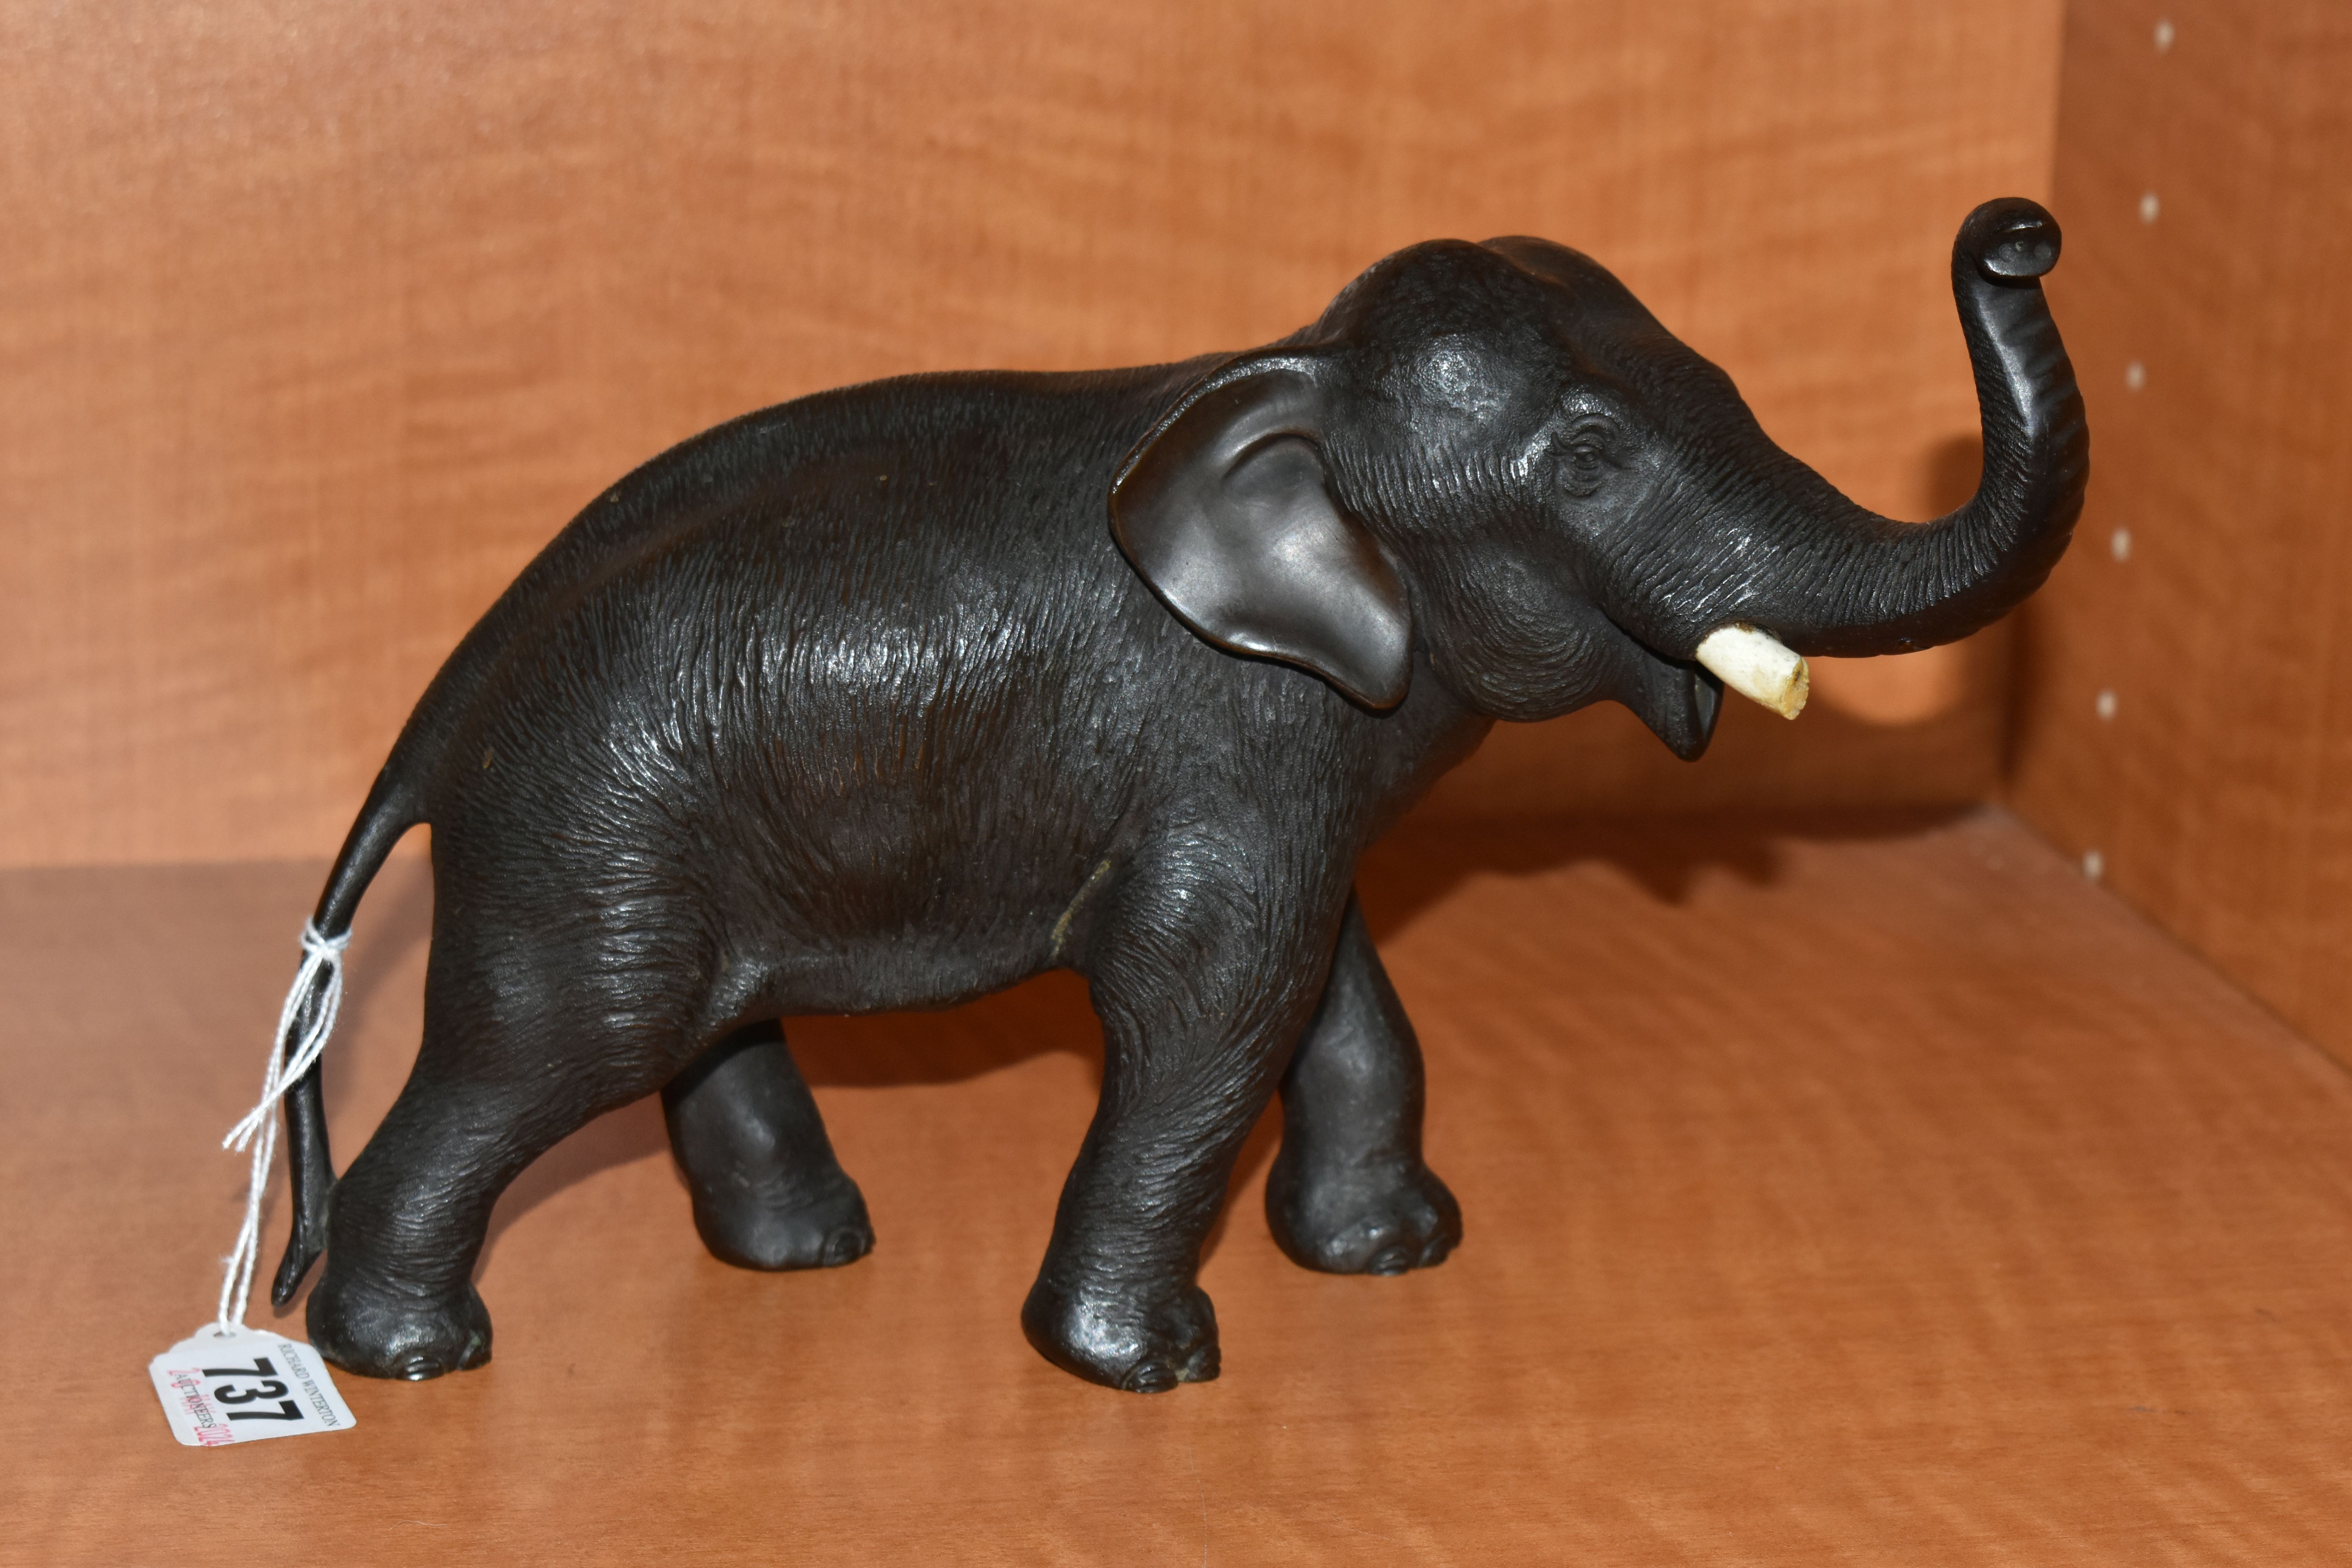 A LATE 19TH CENTURY MEIJI PERIOD JAPANESE BRONZE FIGURE OF AN ELEPHANT WITH TRUNK RAISED, remnants